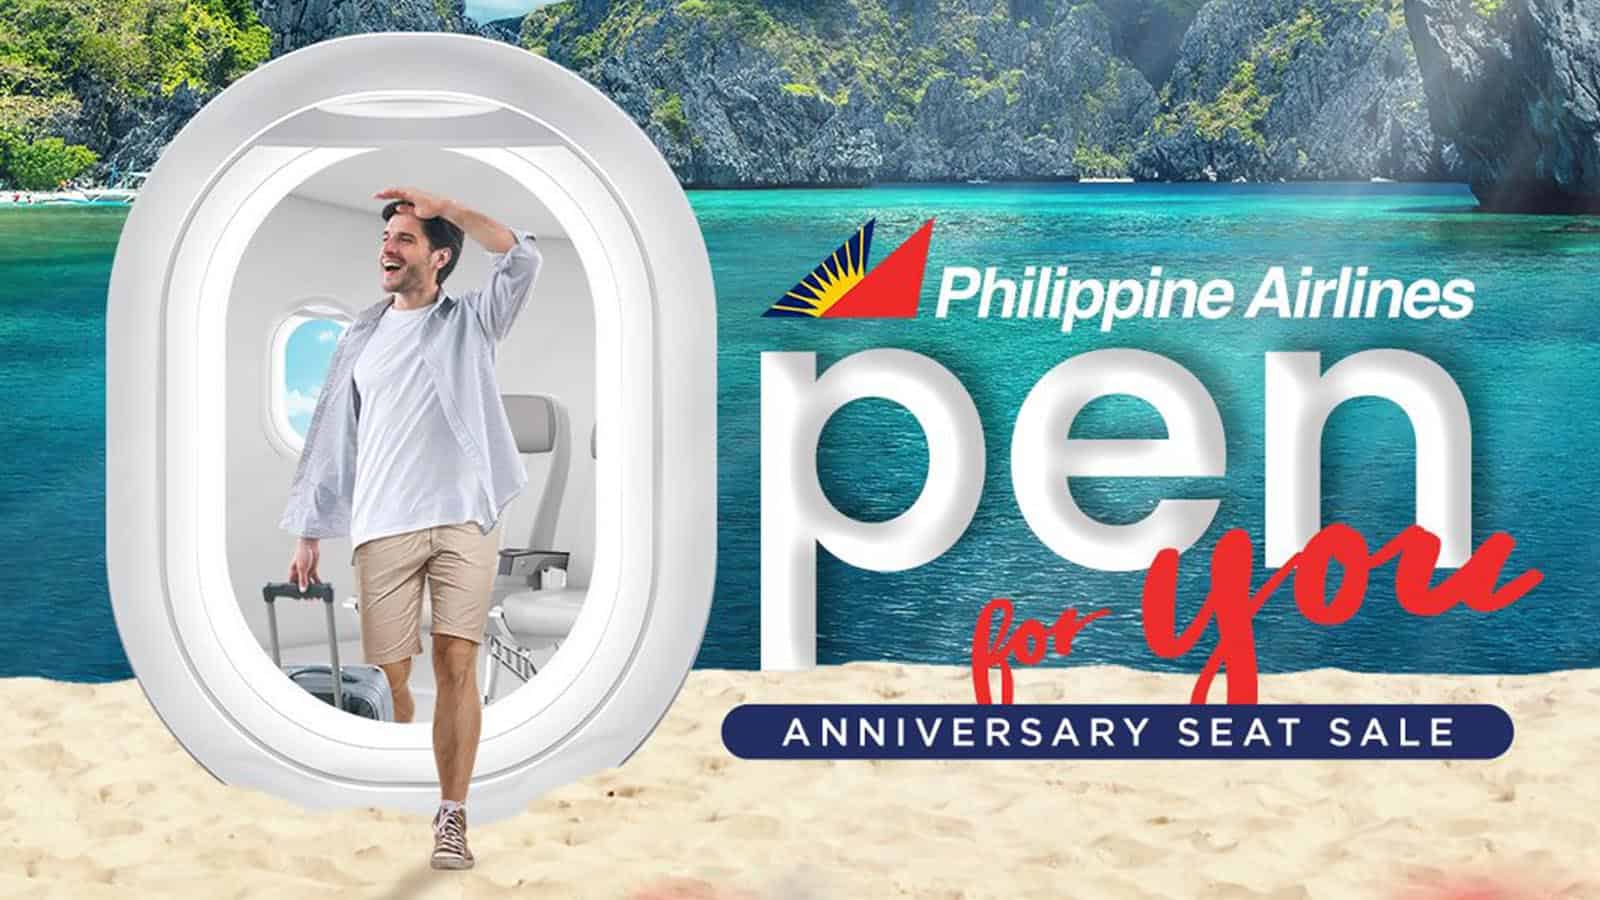 PAL Promo 2022 2022 Philippine Airlines PROMO: 81st anniversary seat sale